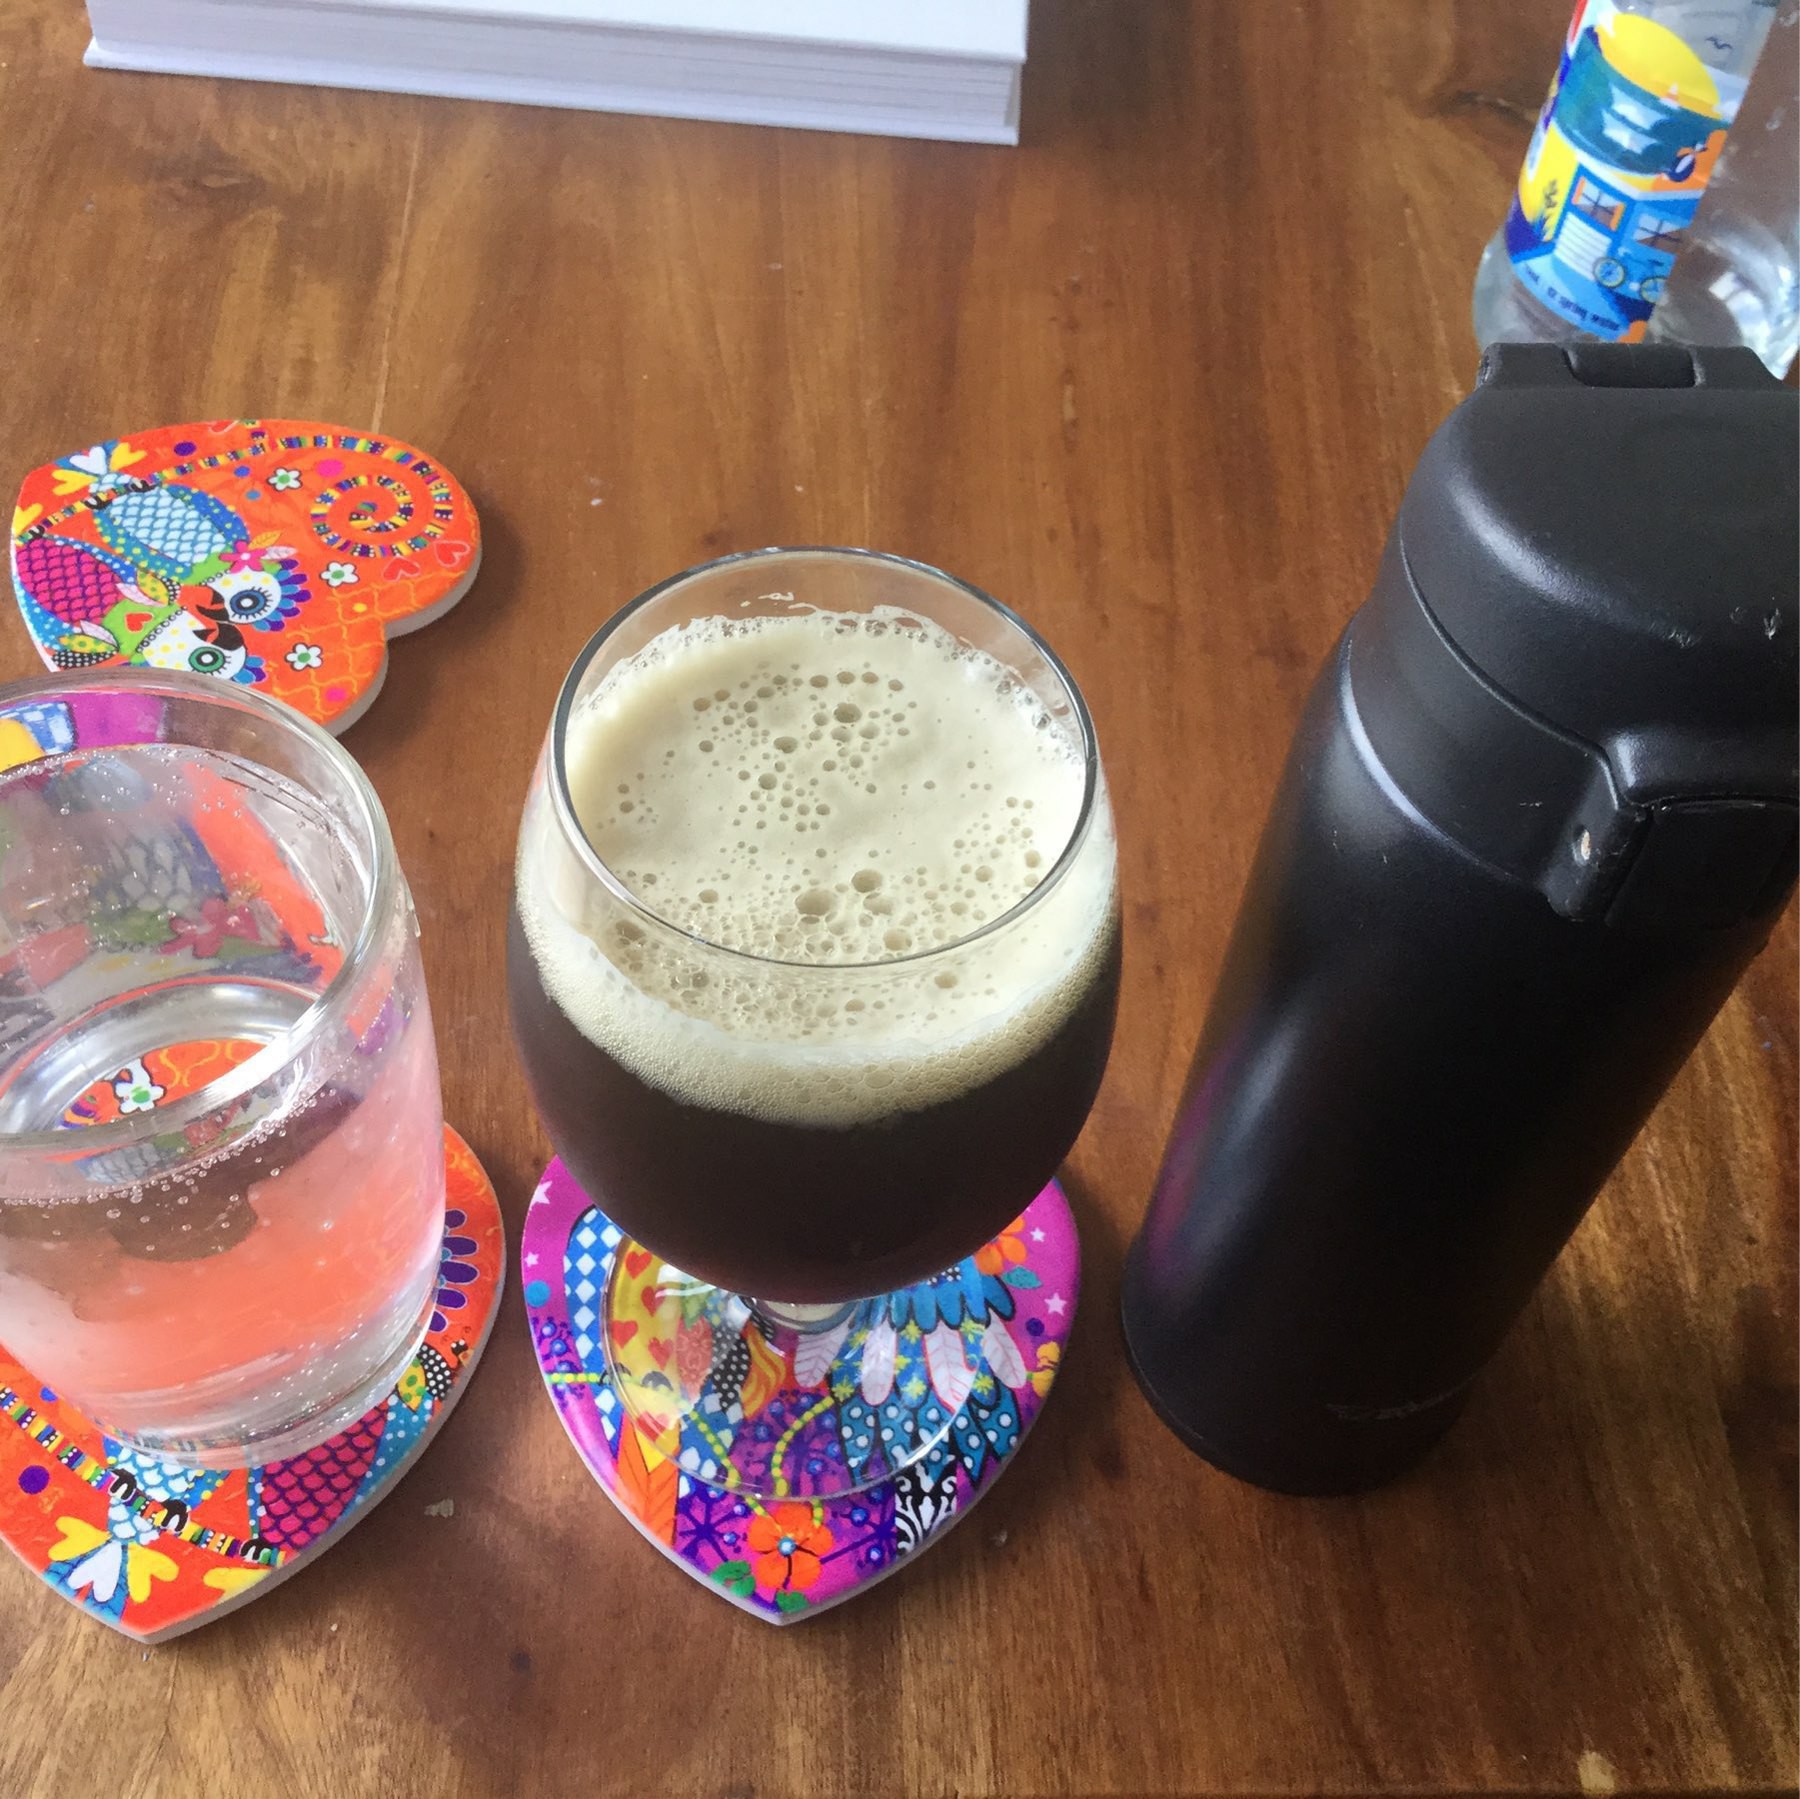 A glass of sparkling water, a glass of beer and a thermos of coffee. 